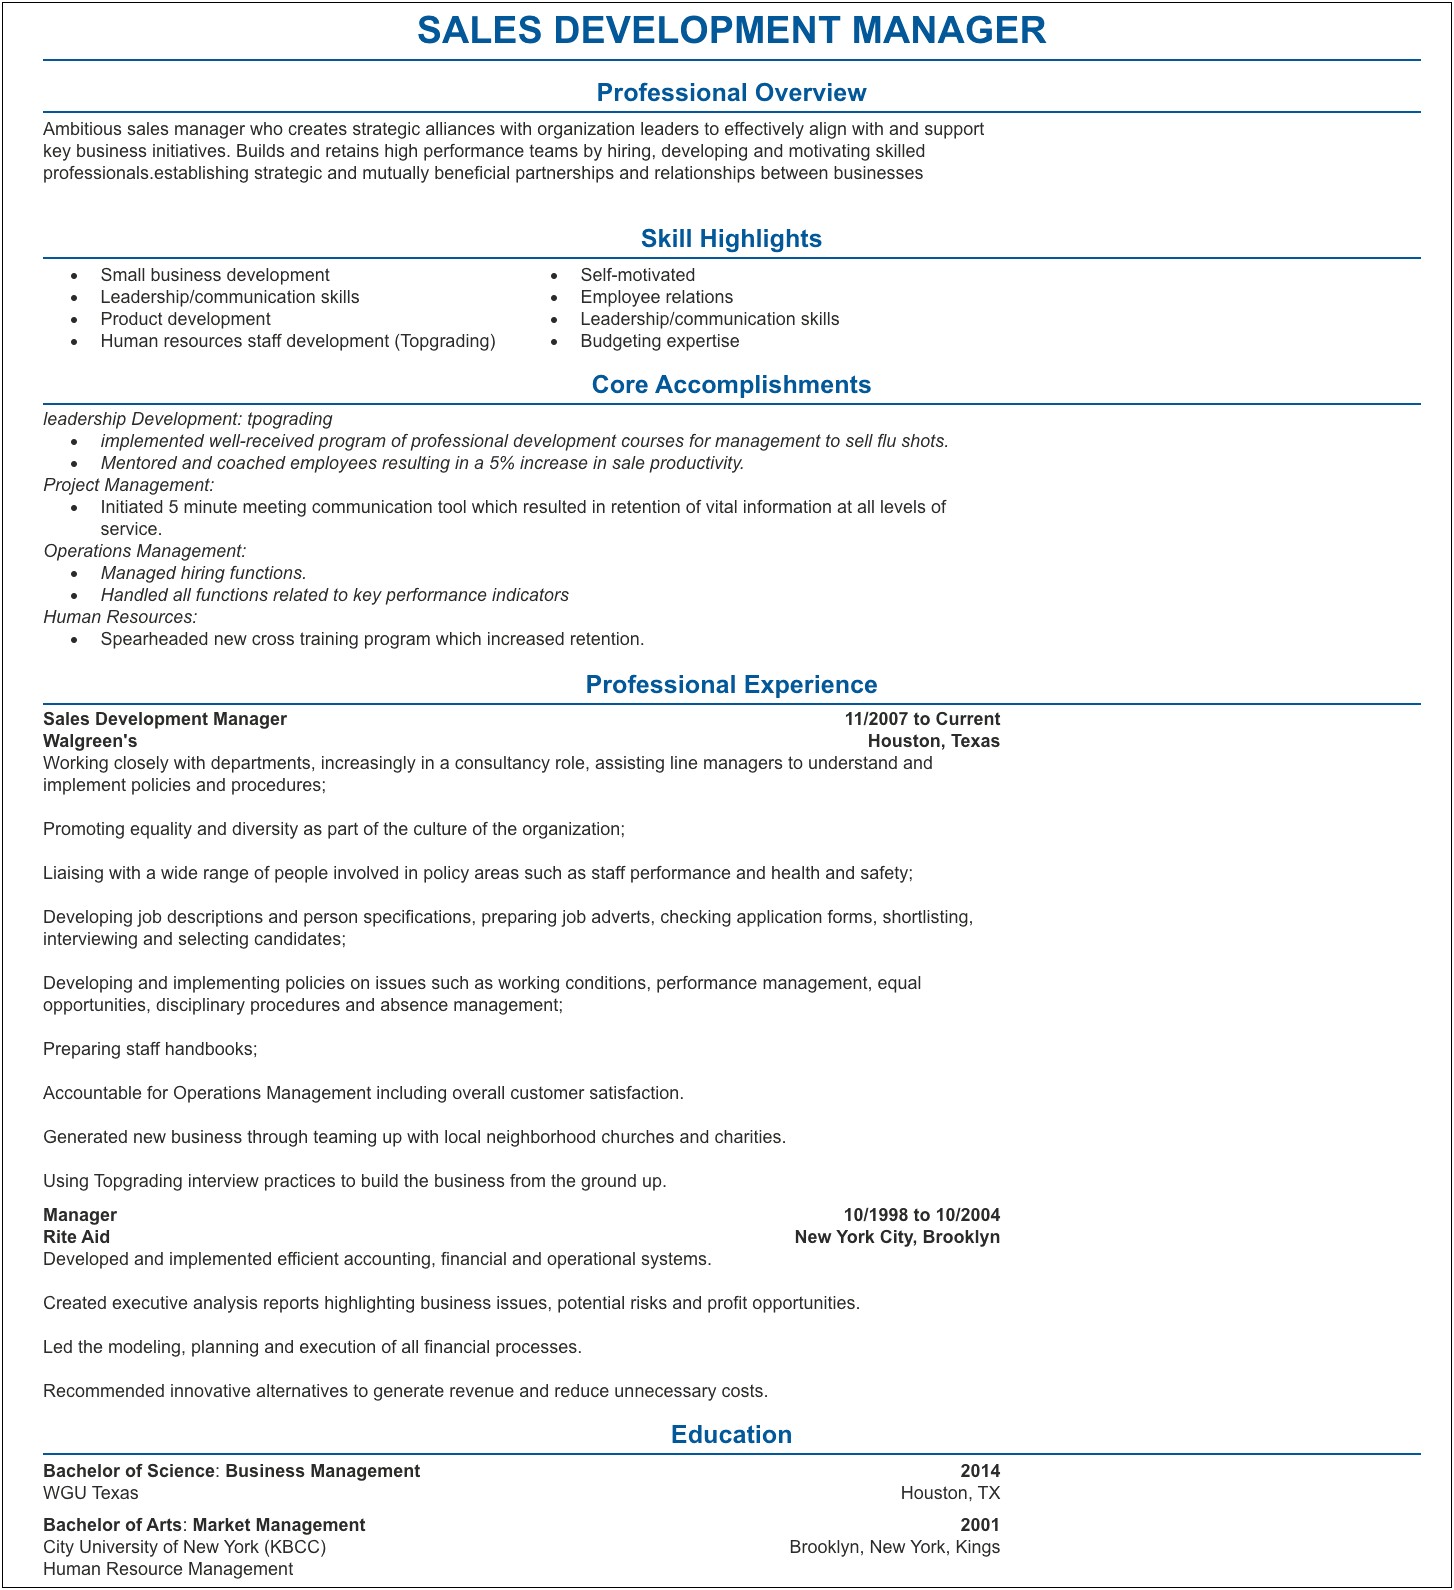 Resume For Person With One Job